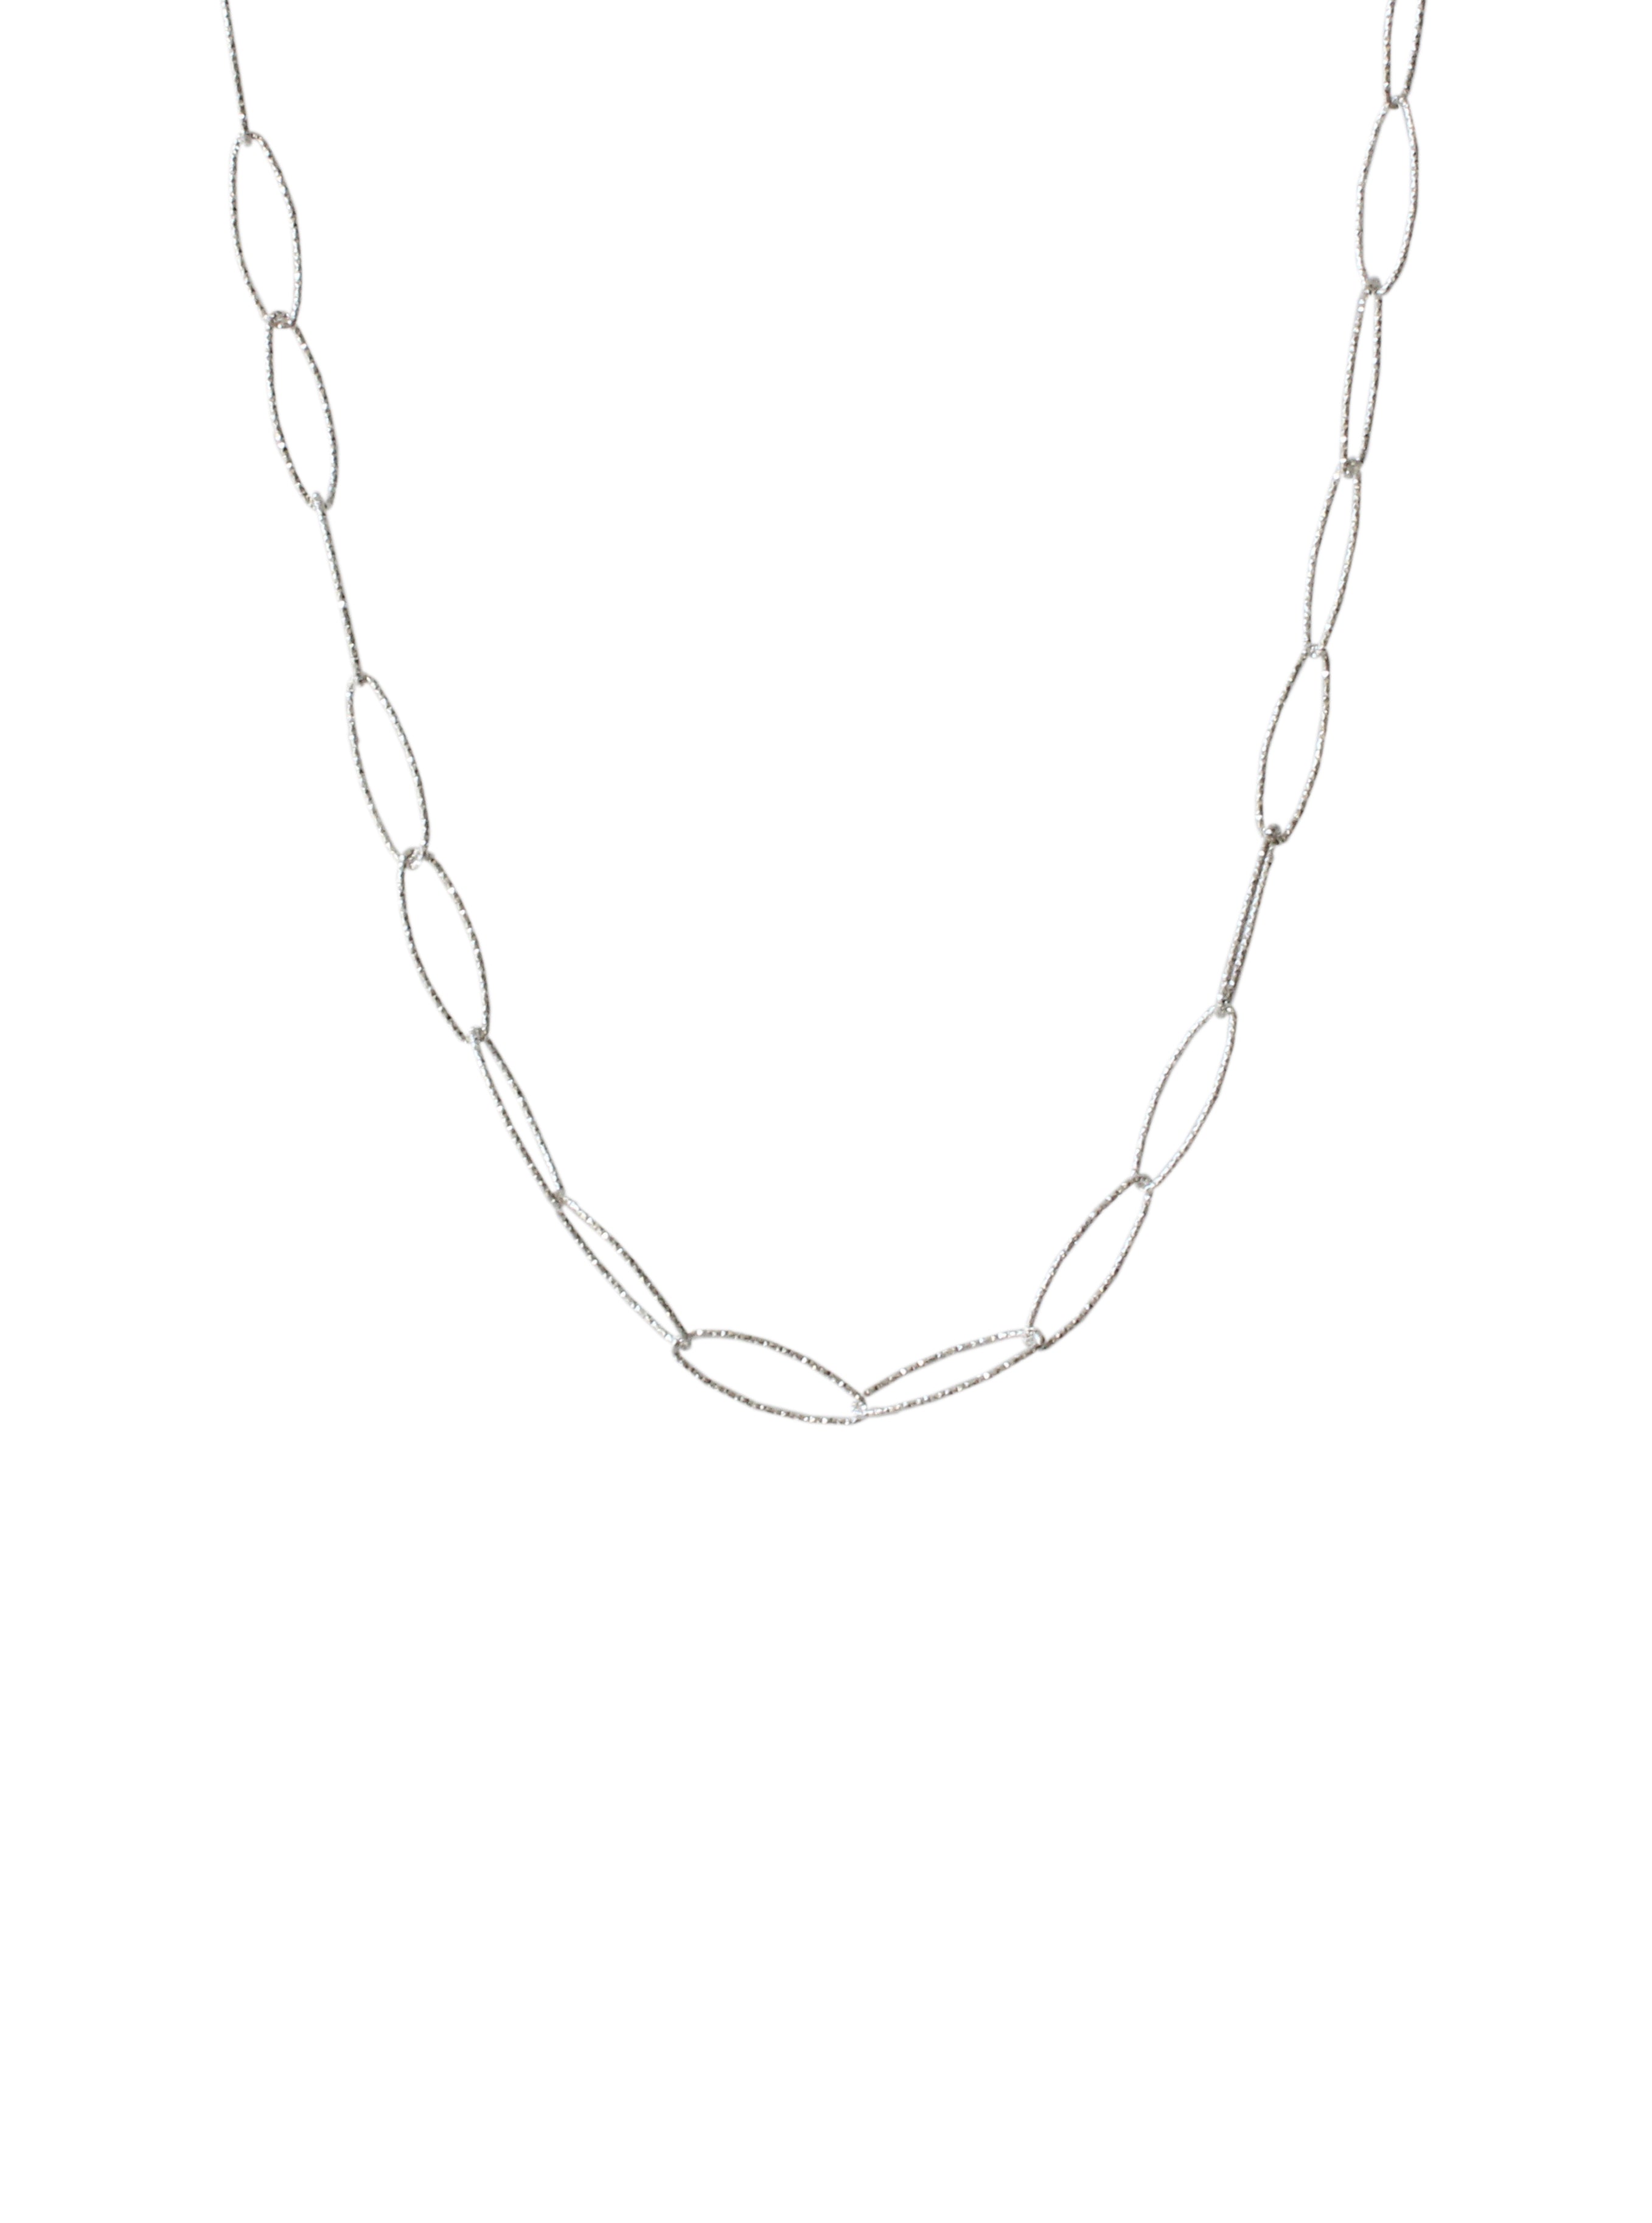 Marquise Chain Necklace